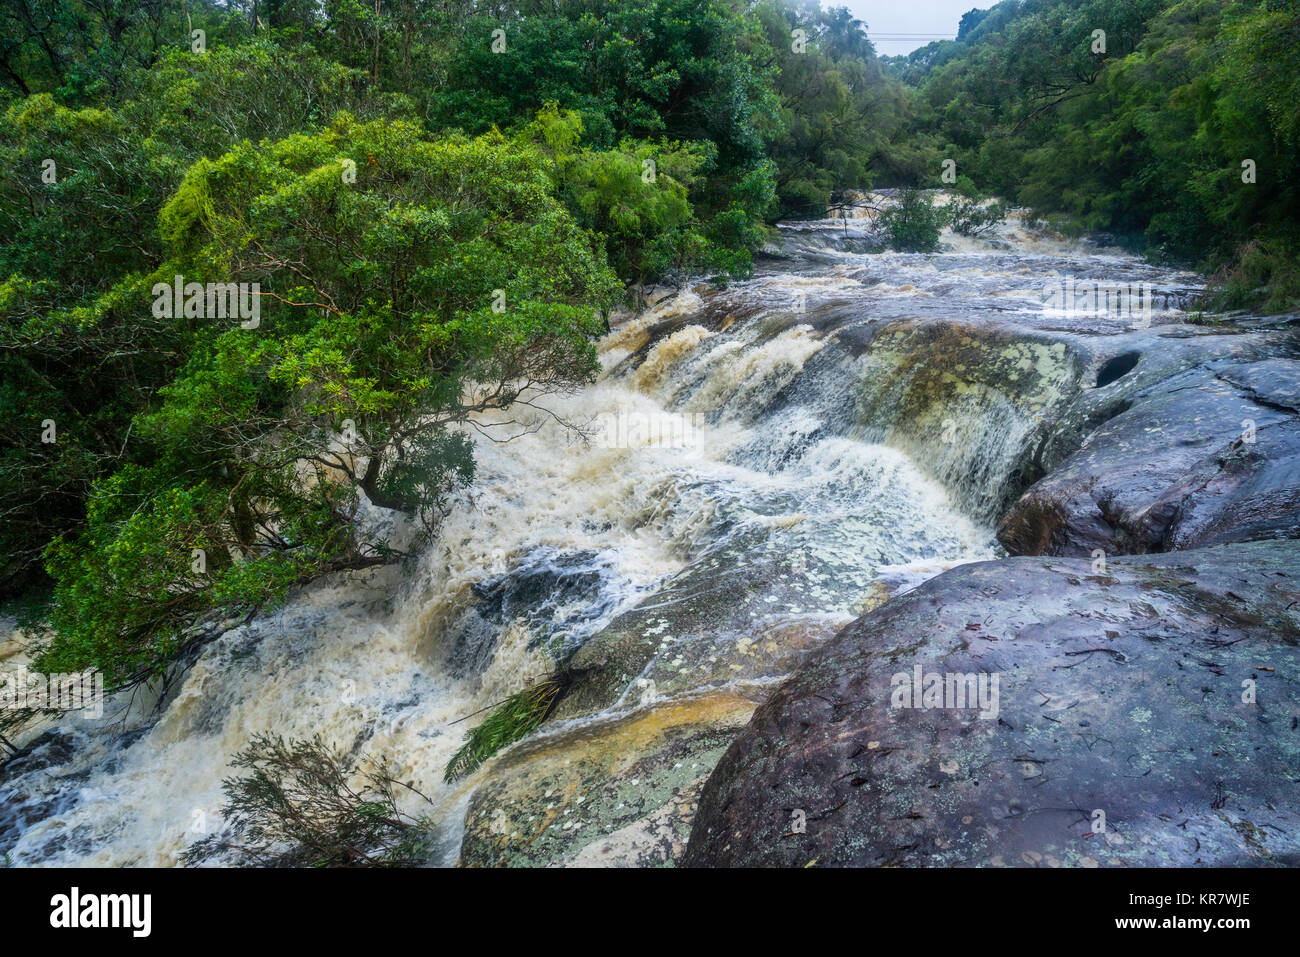 Australia, New South Wales, Central Coast, Brisbane Water National Park, Floods Creek forms a raging torrent after heavy rainfall at Somersby Falls Stock Photo